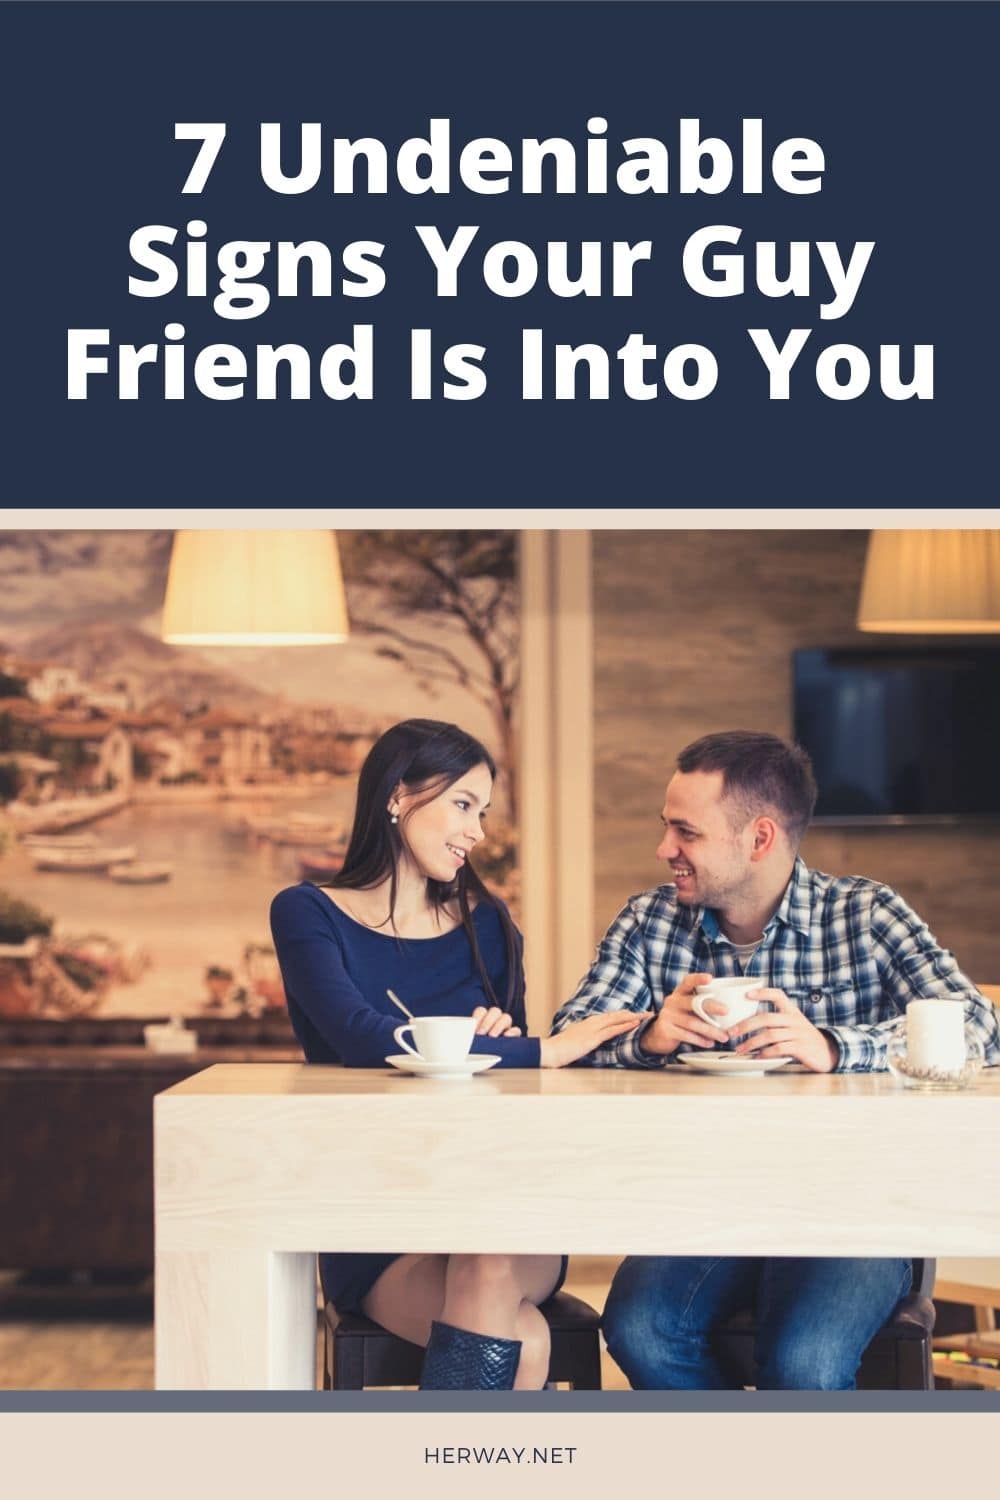 7 Undeniable Signs Your Guy Friend Is Into You